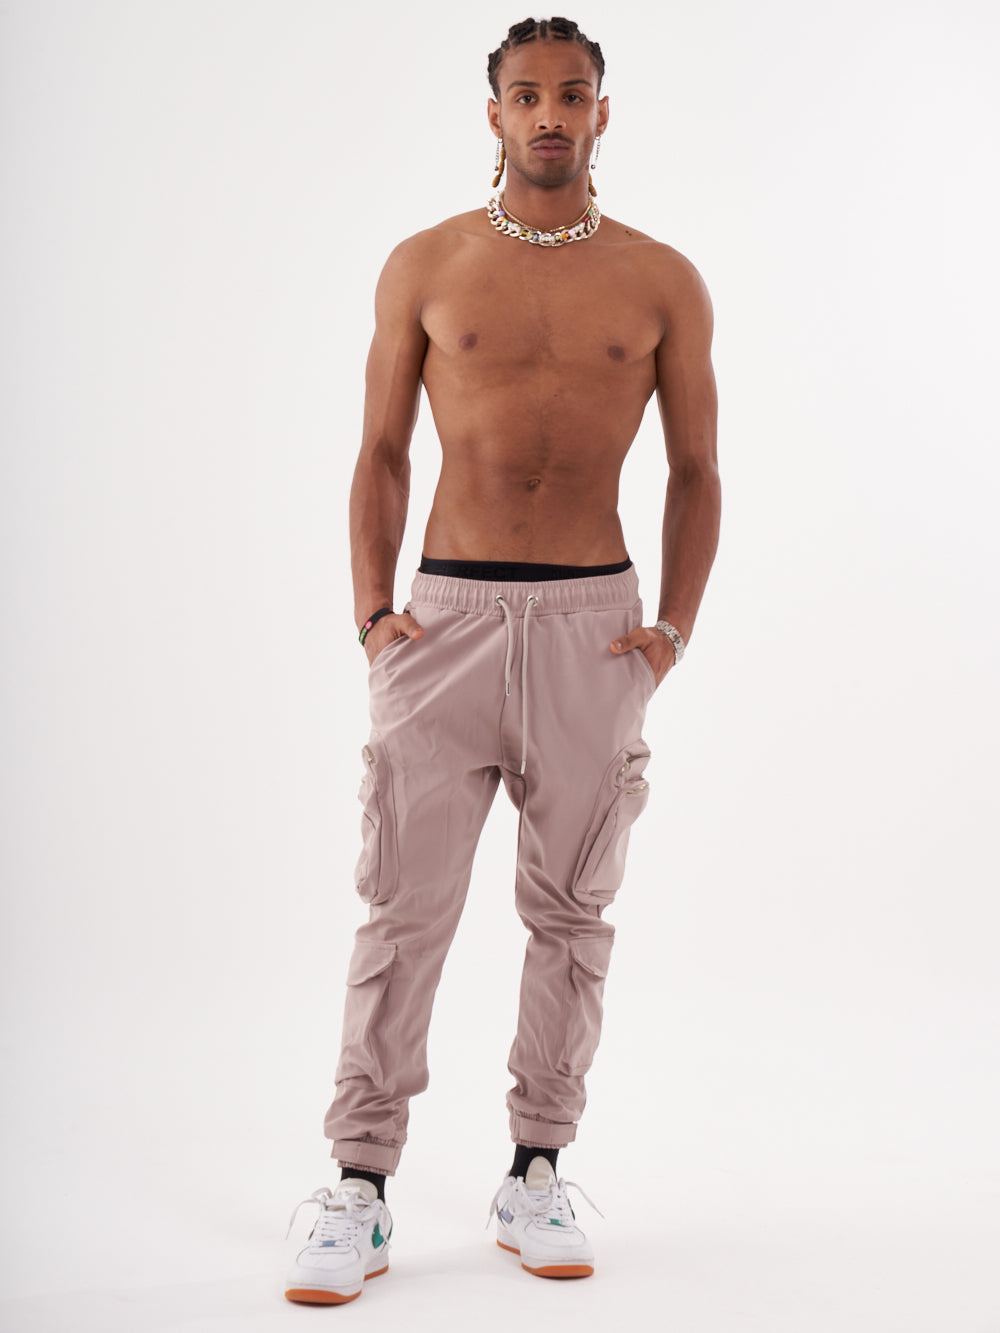 A man in SPUNK JOGGERS | MAUVE posing in front of a white background.